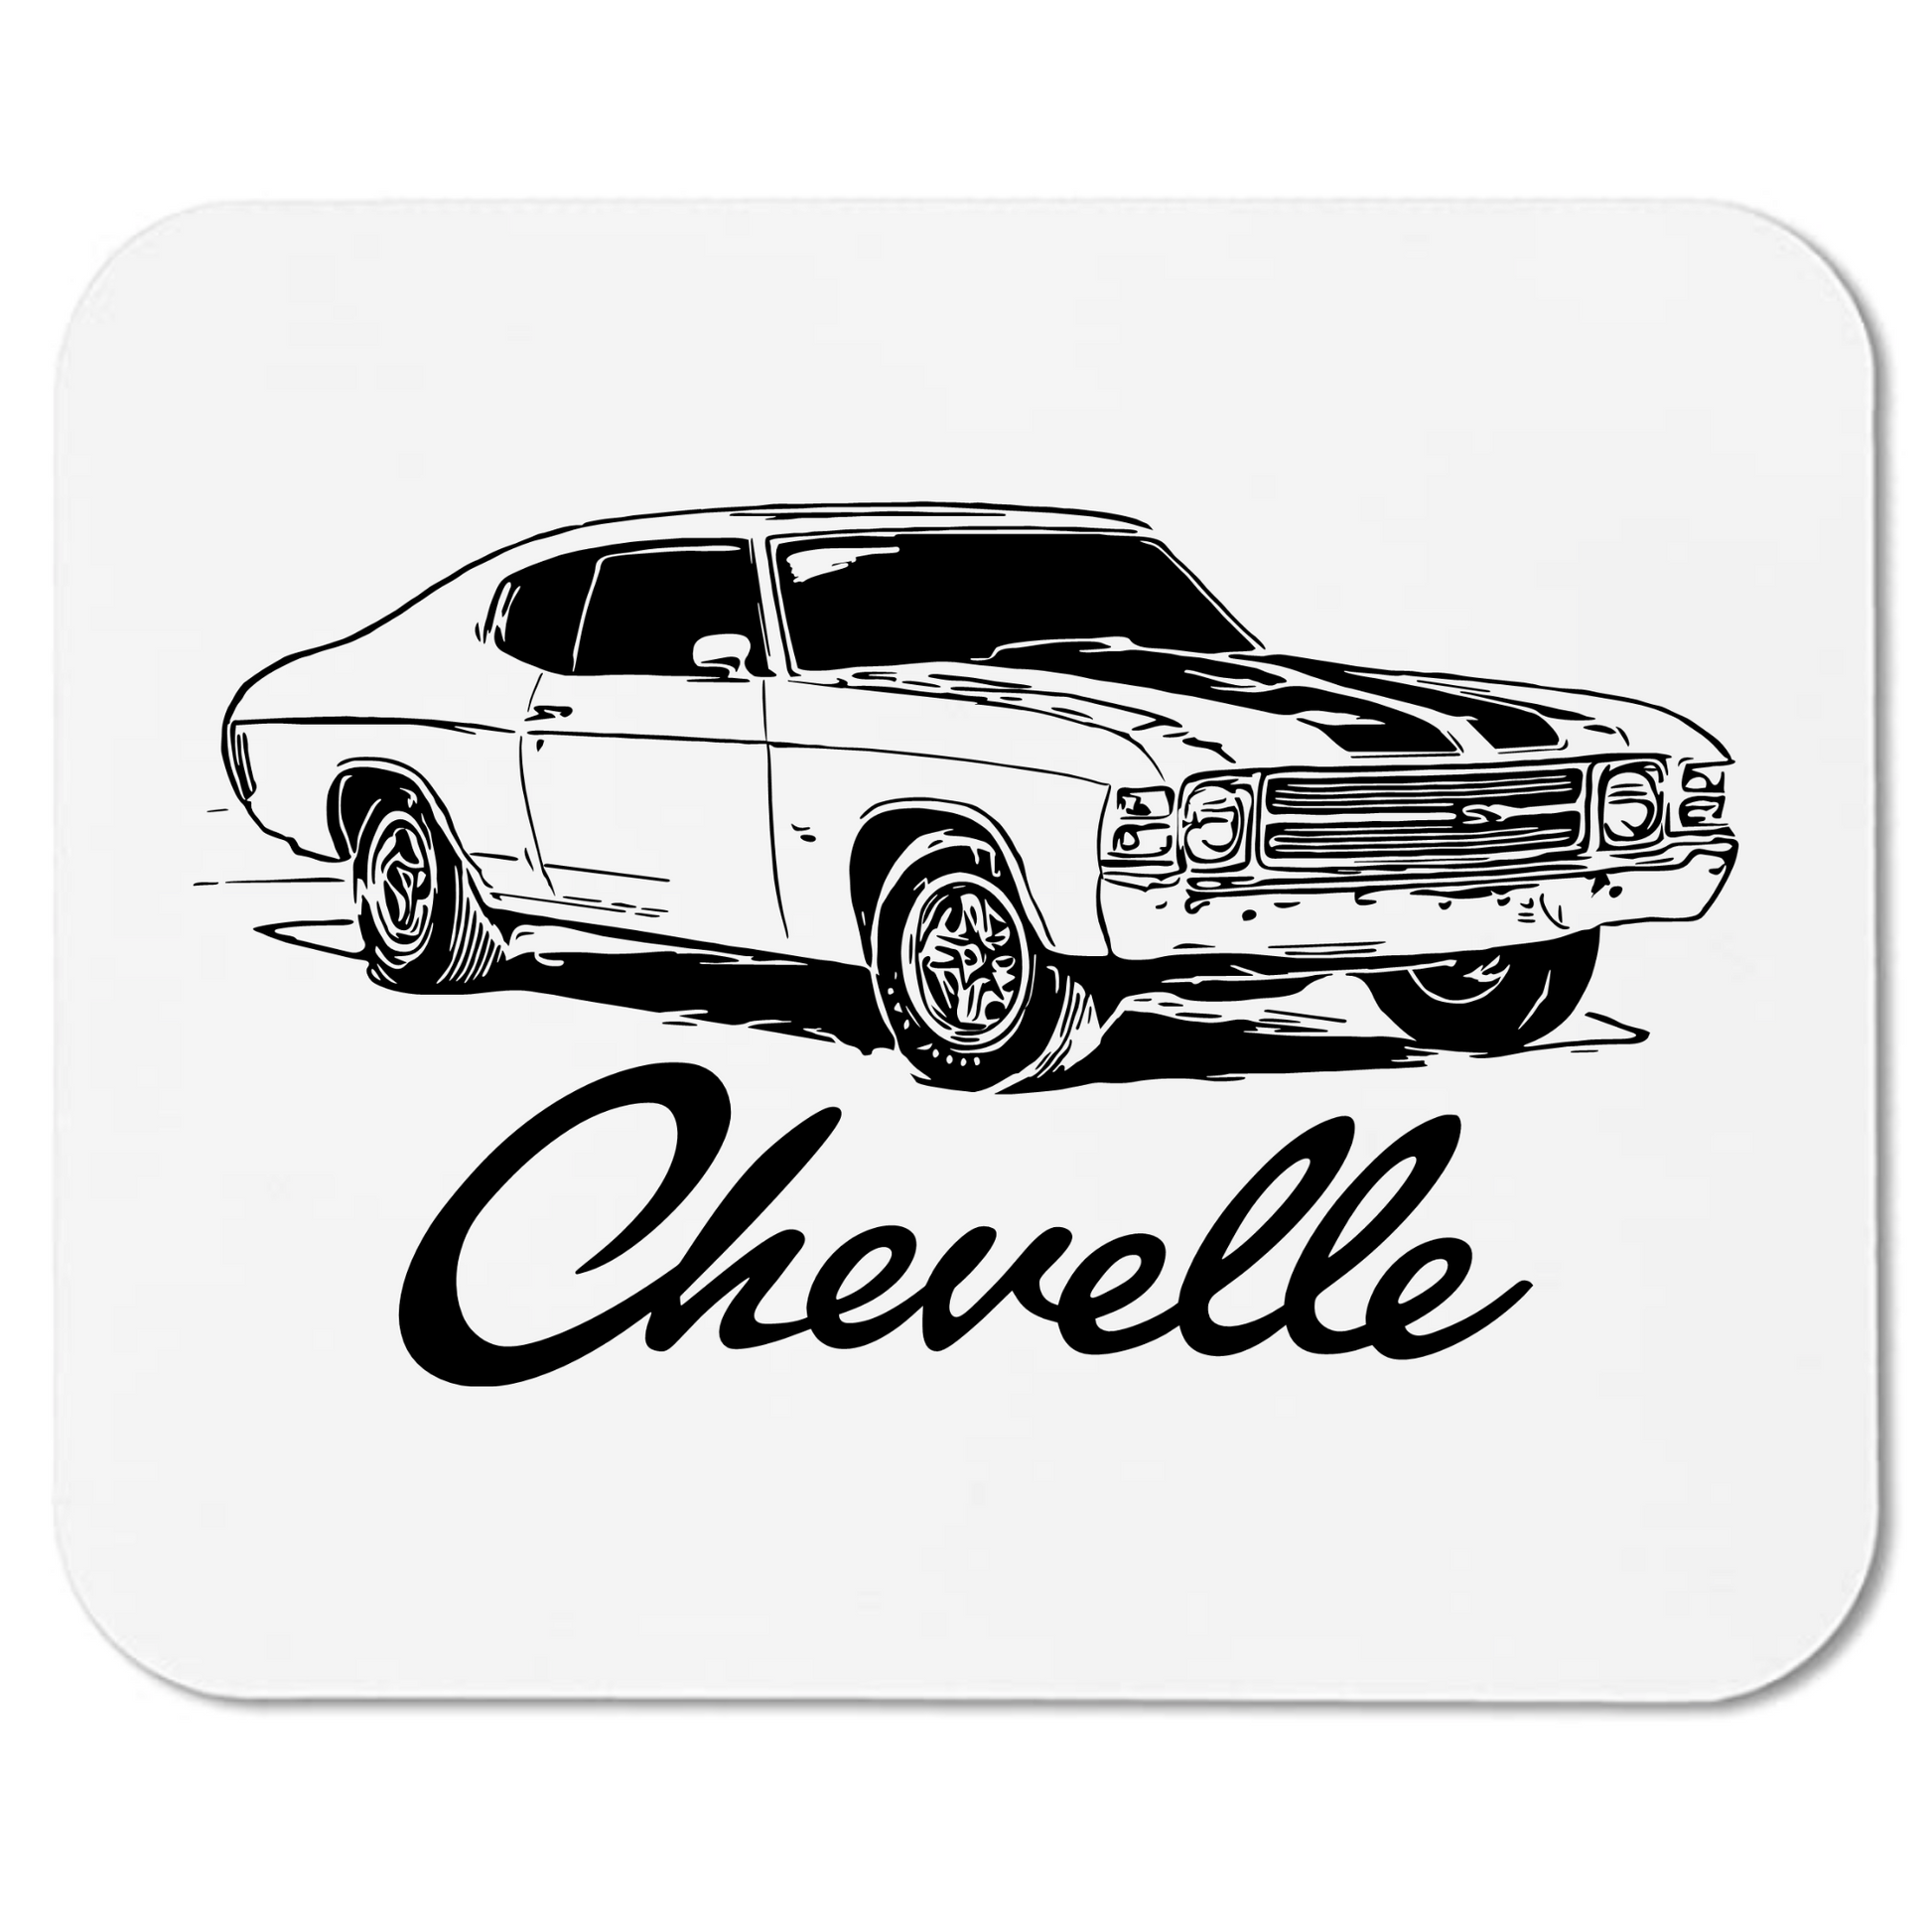 Classic Chevy Chevelle - Mouse Pad - 2 Sizes! - Mister Snarky's